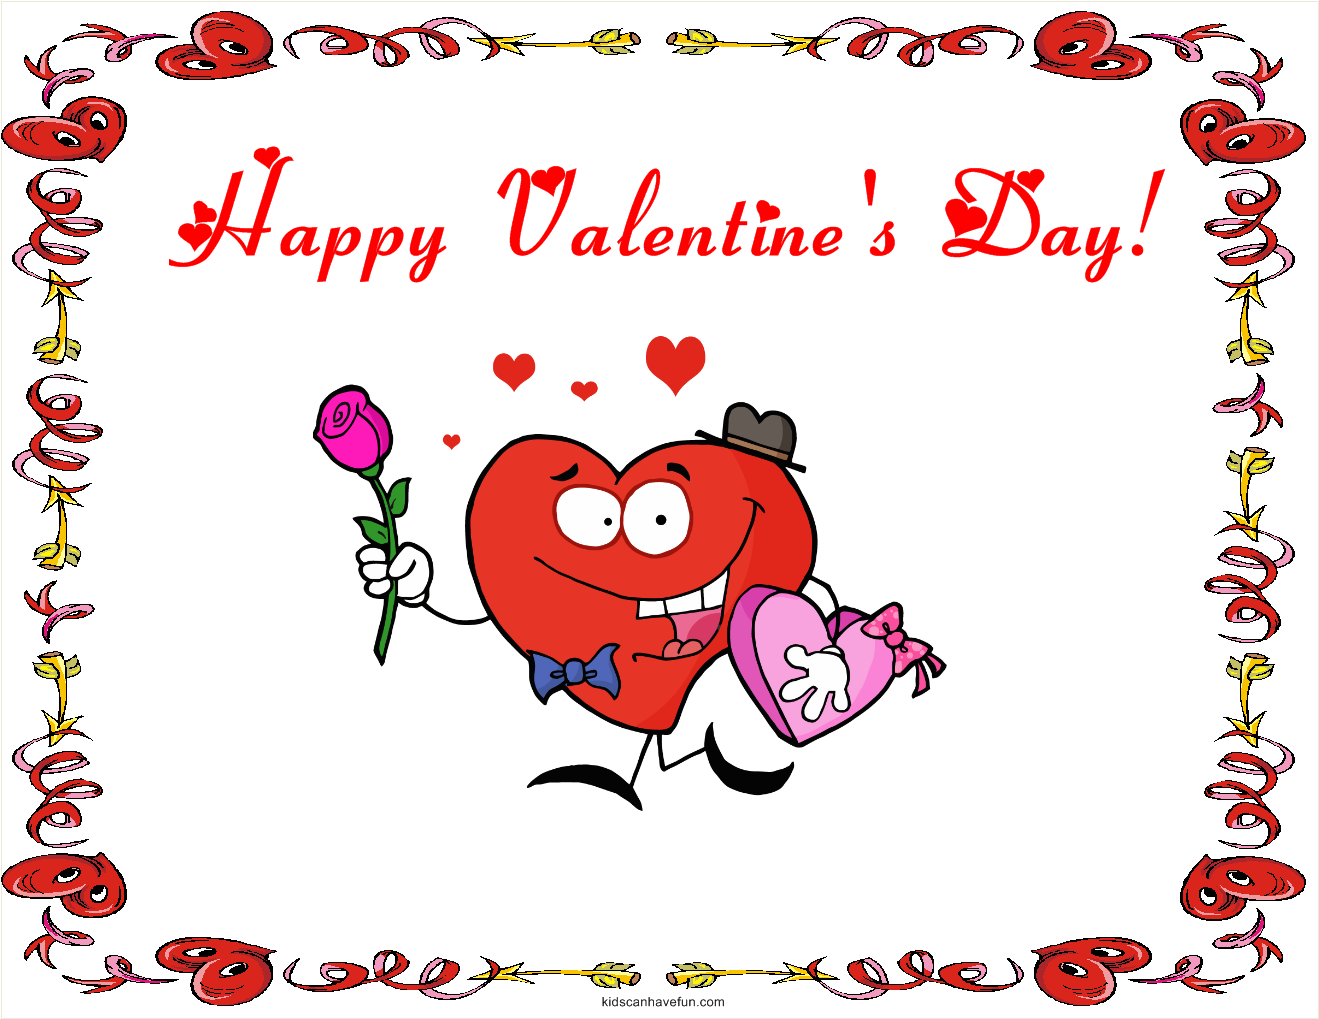 Happy Valentines Day Picture - Funny Valentines Day Cards For Kids - HD Wallpaper 